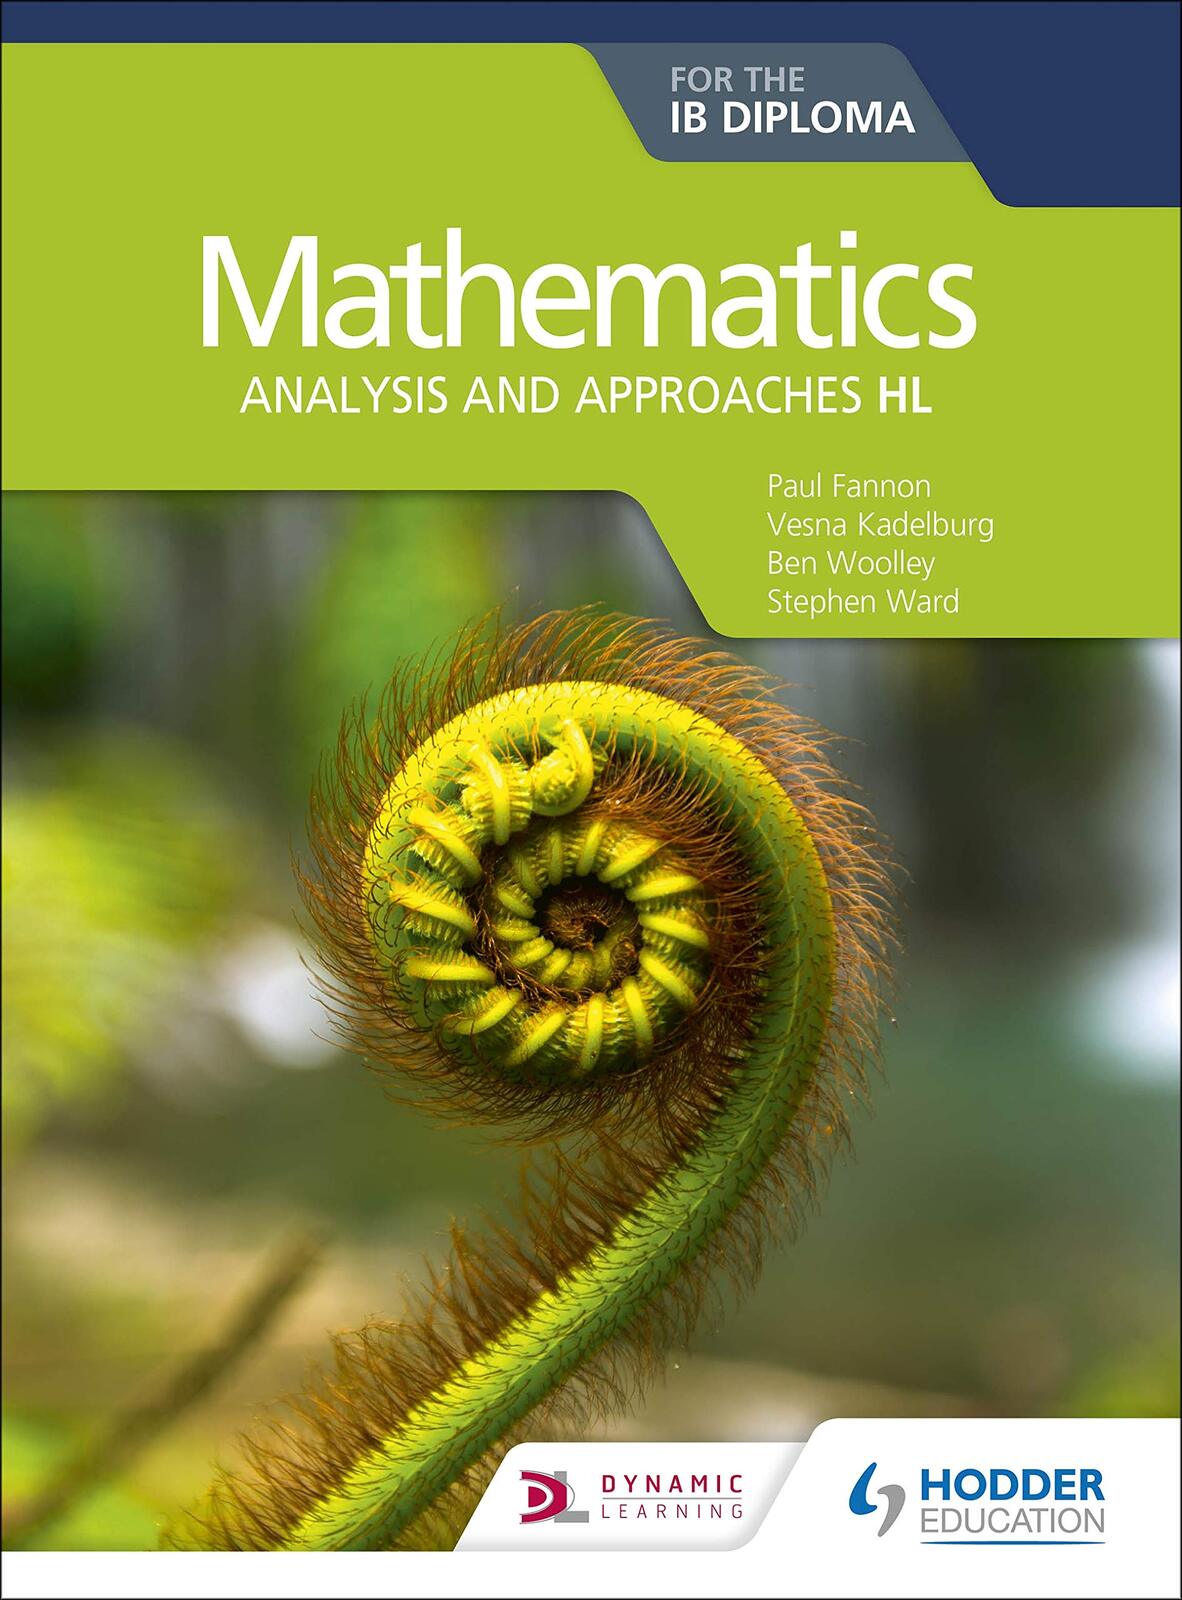 mathematics-for-the-ib-diploma-analysis-and-approaches-hl